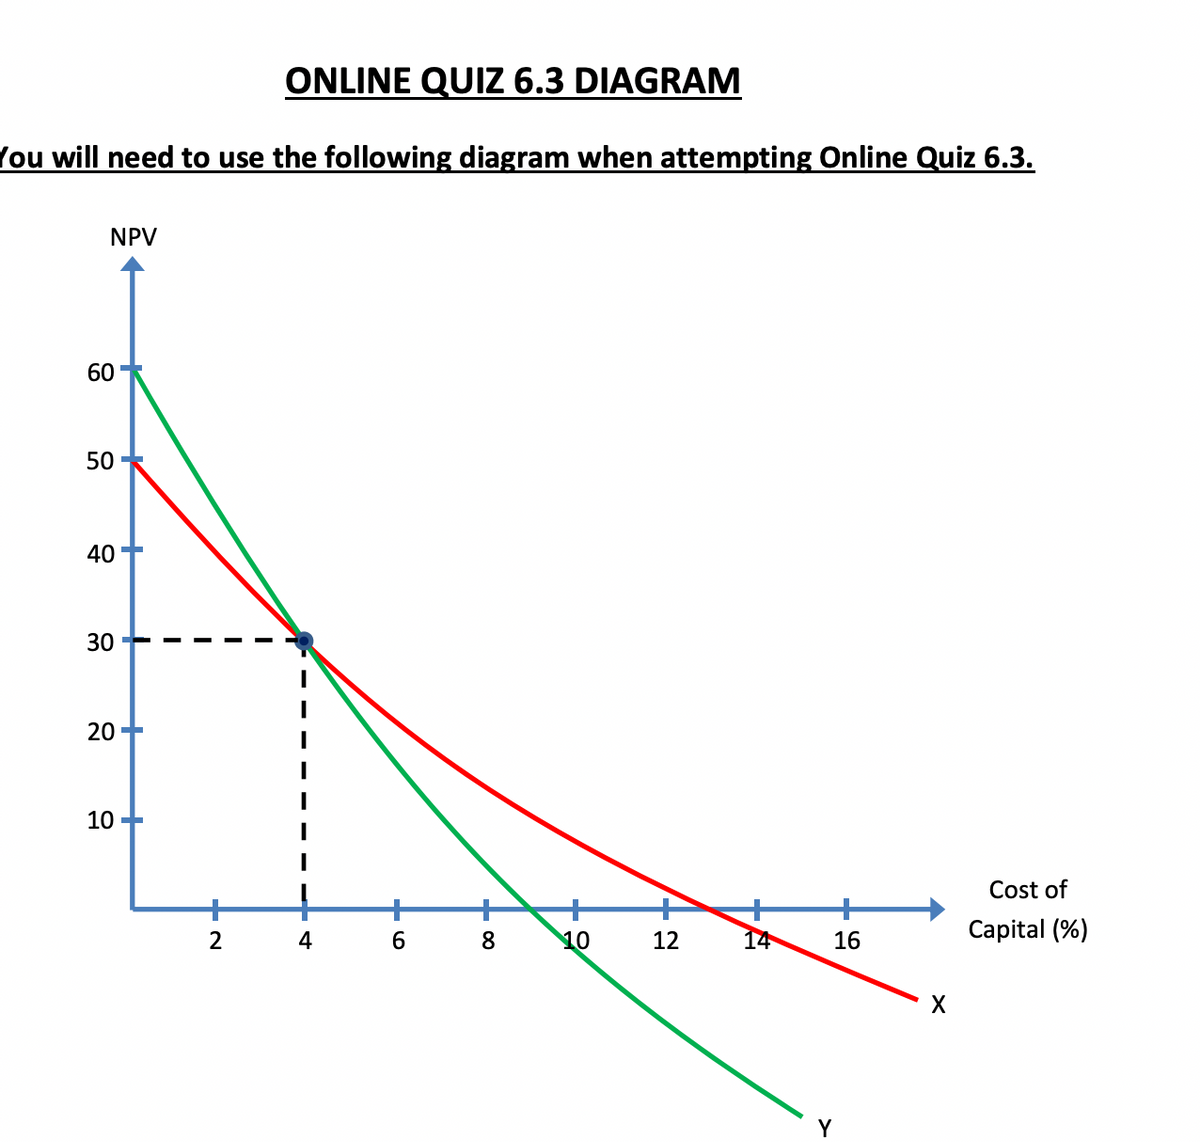 ONLINE QUIZ 6.3 DIAGRAM
You will need to use the following diagram when attempting Online Quiz 6.3.
NPV
60
50
30
20 +
10
Cost of
2
4
6.
8.
10
12
14
16
Capital (%)
40
